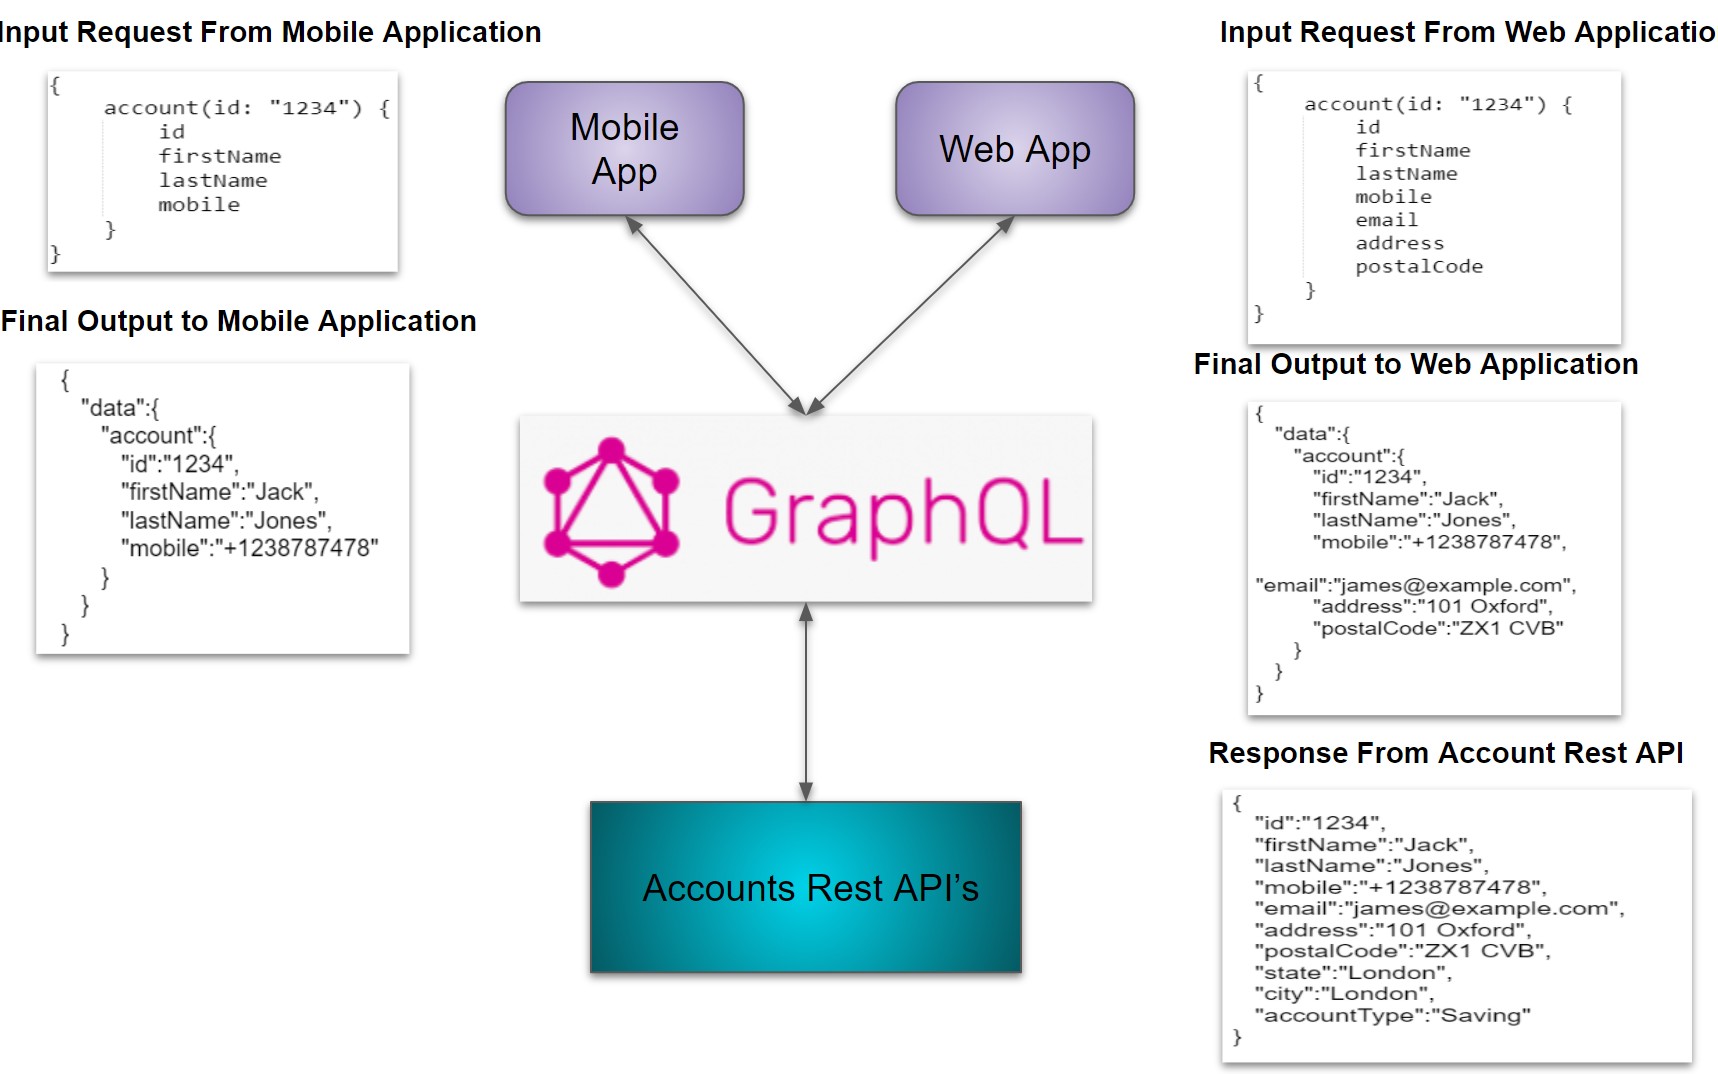 Implementing GraphQL with MuleSoft